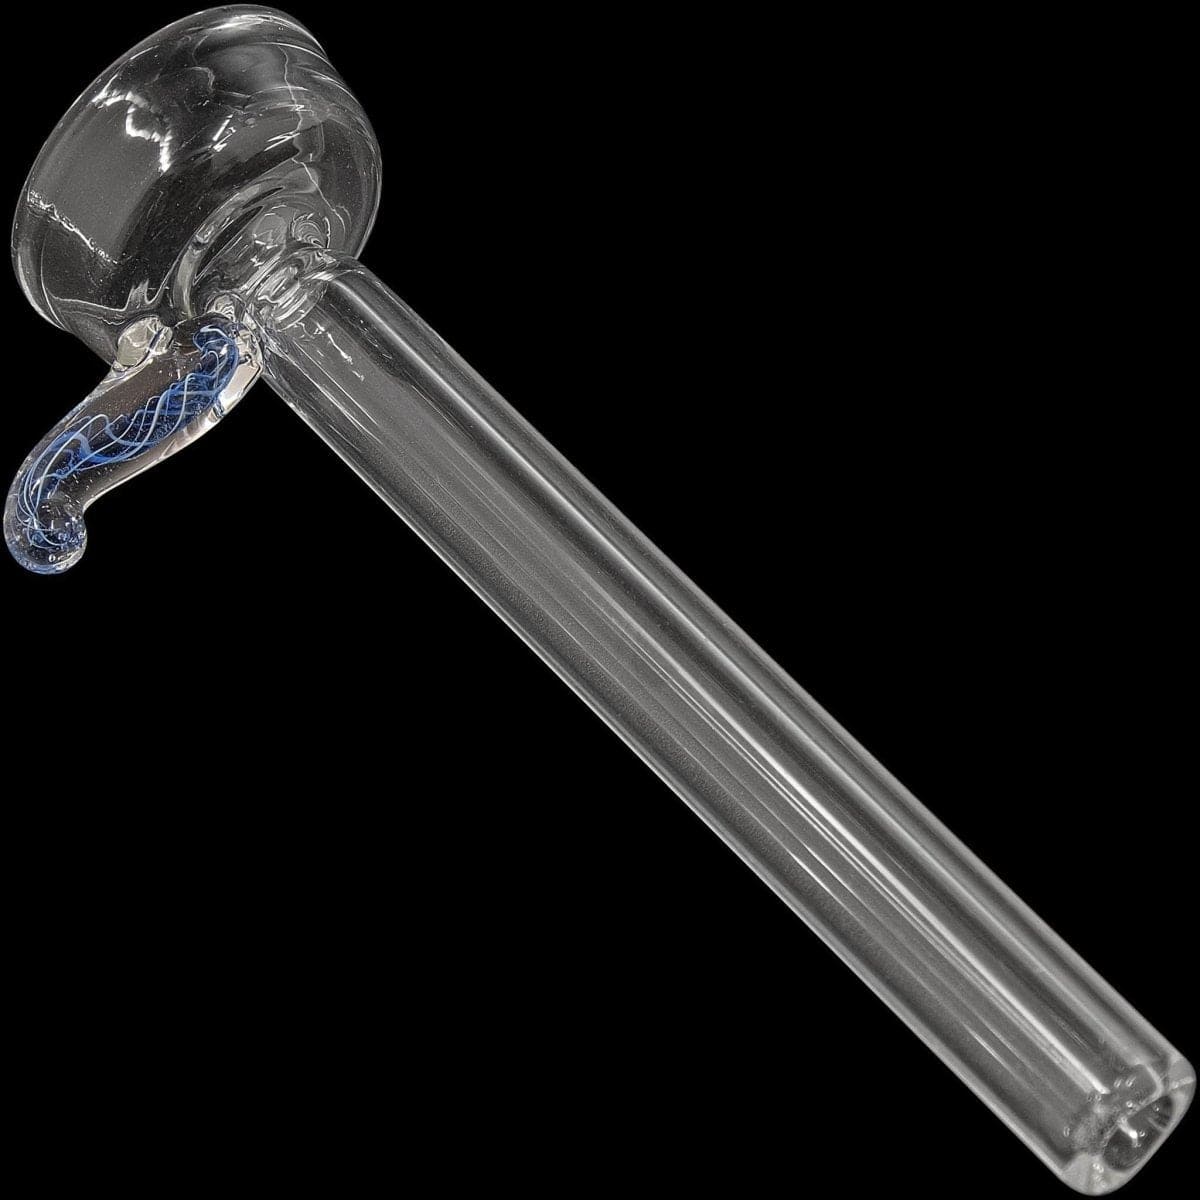 LA Pipes Smoking Accessory 9mm Clear Slide Bowl w/ Color Handle for Pull-Stem Bongs